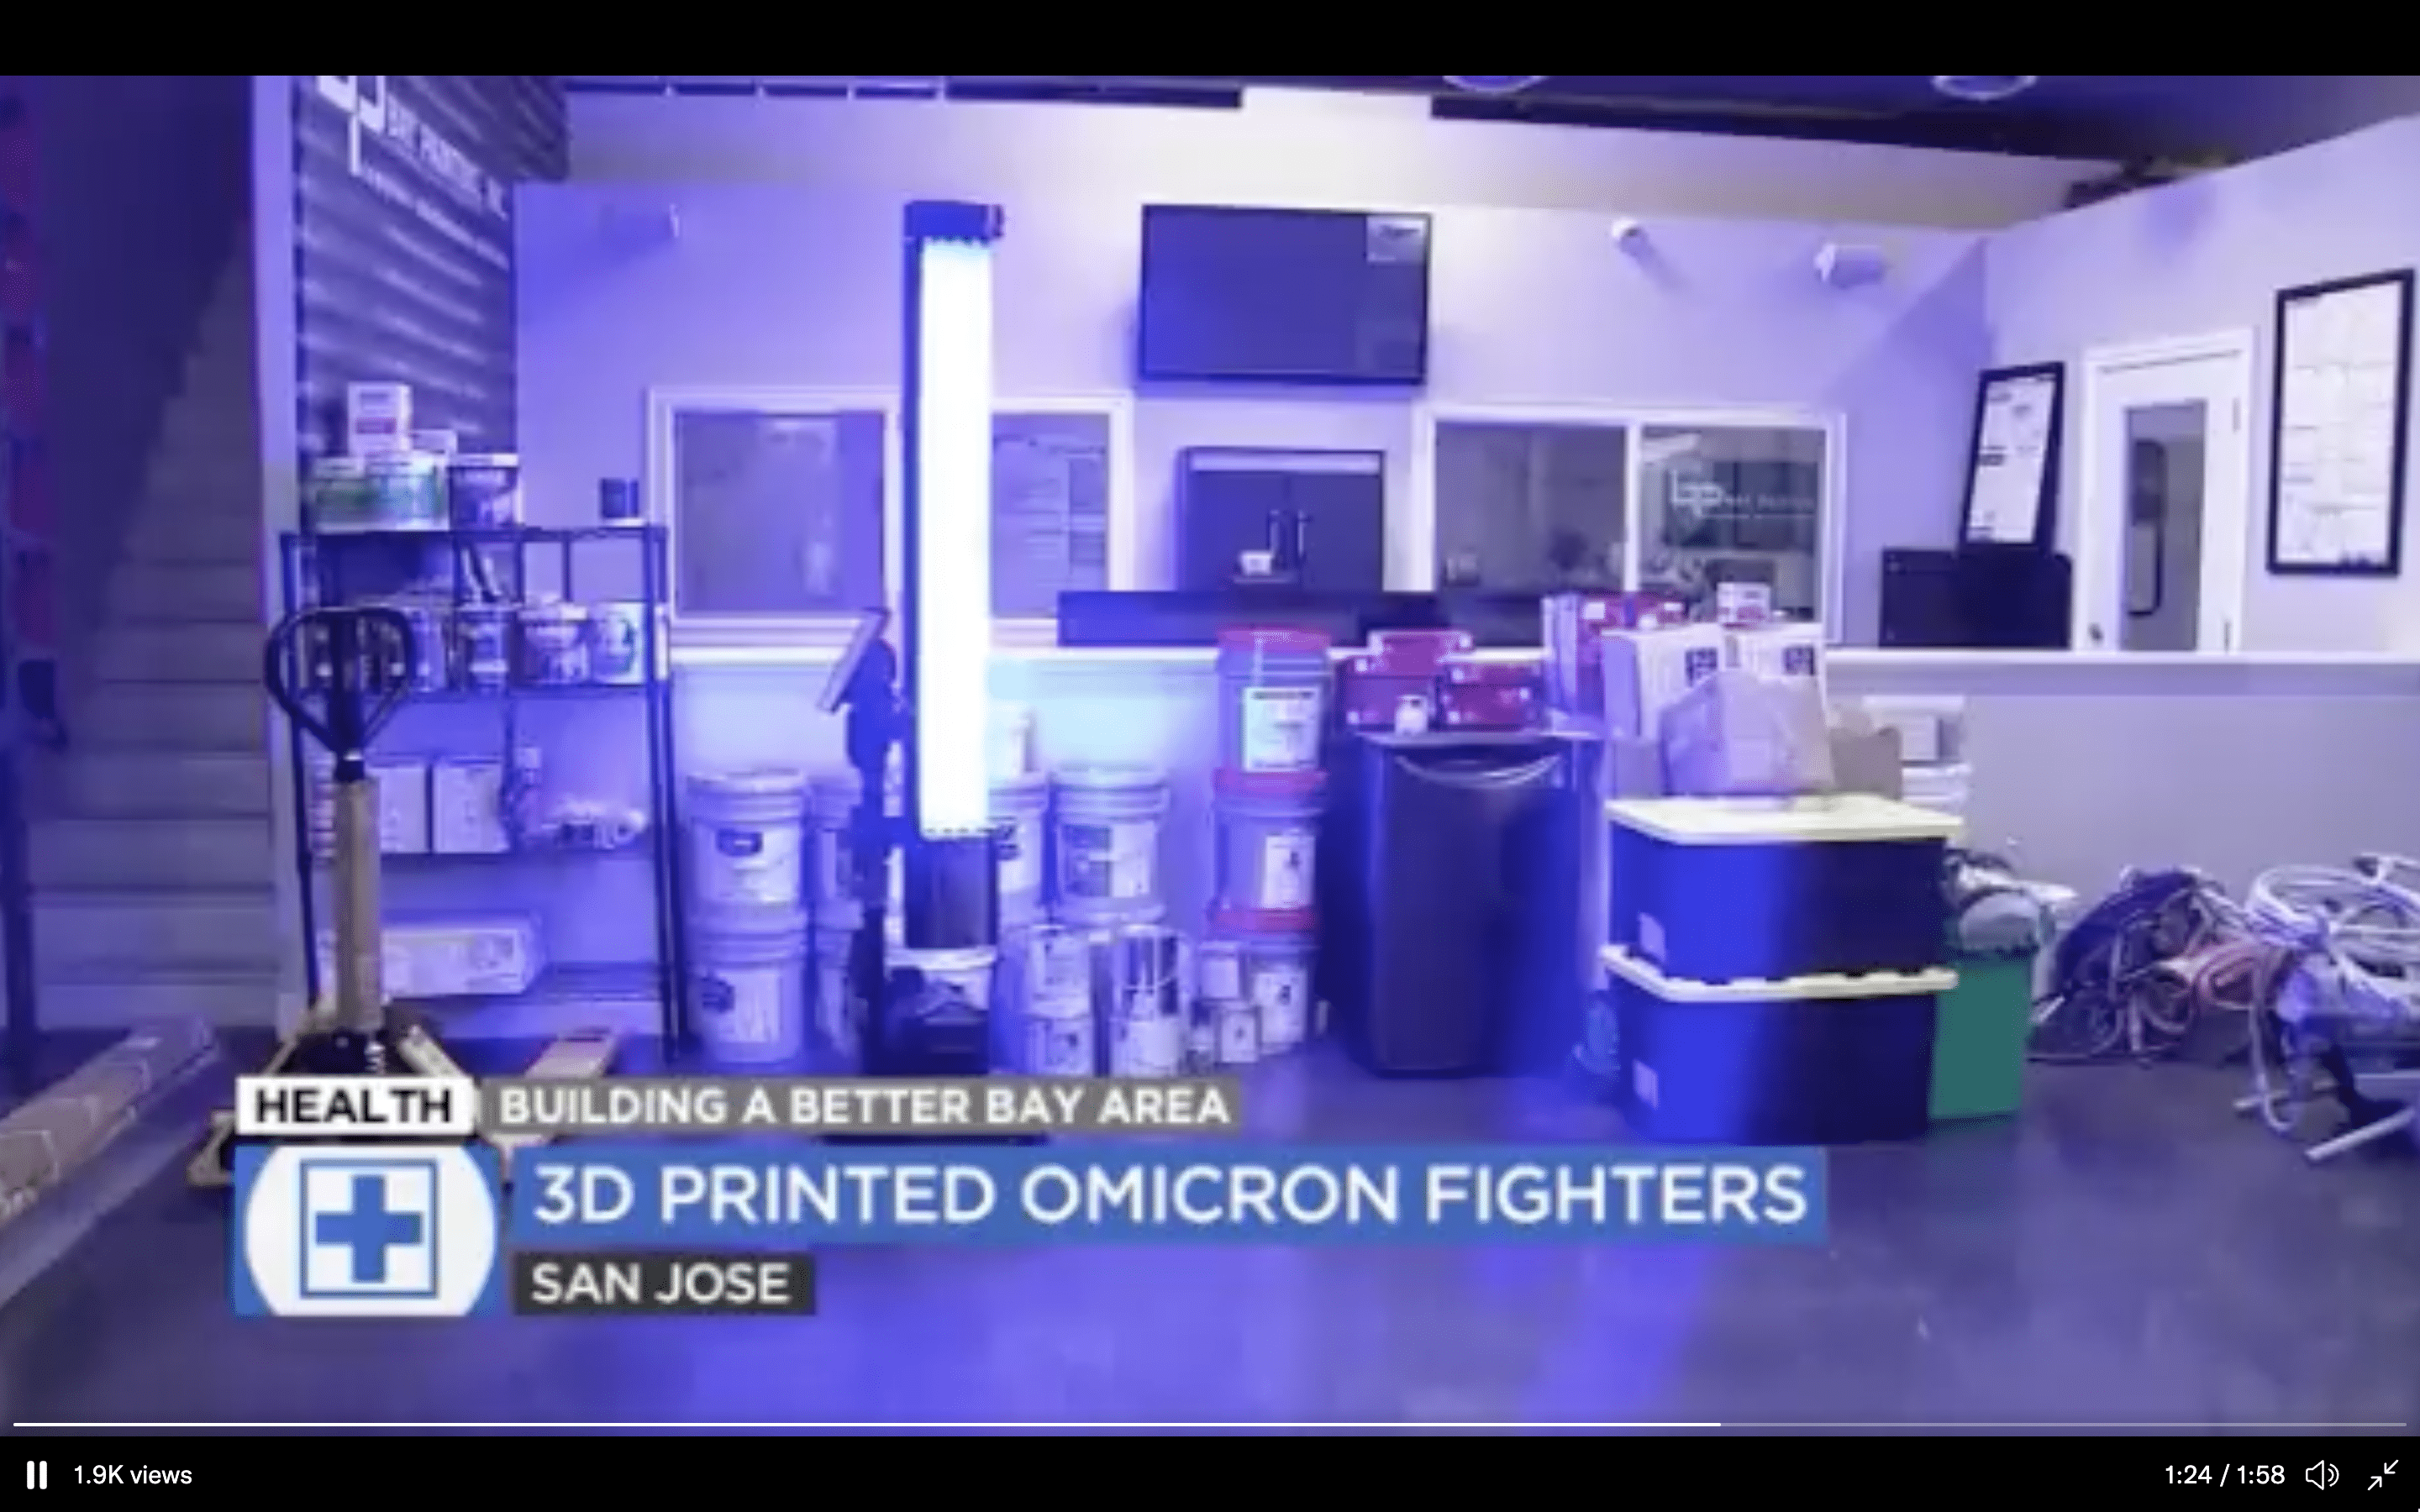 The newest Omnicron fighter is an autonomous robot with ultraviolet light sabers. 